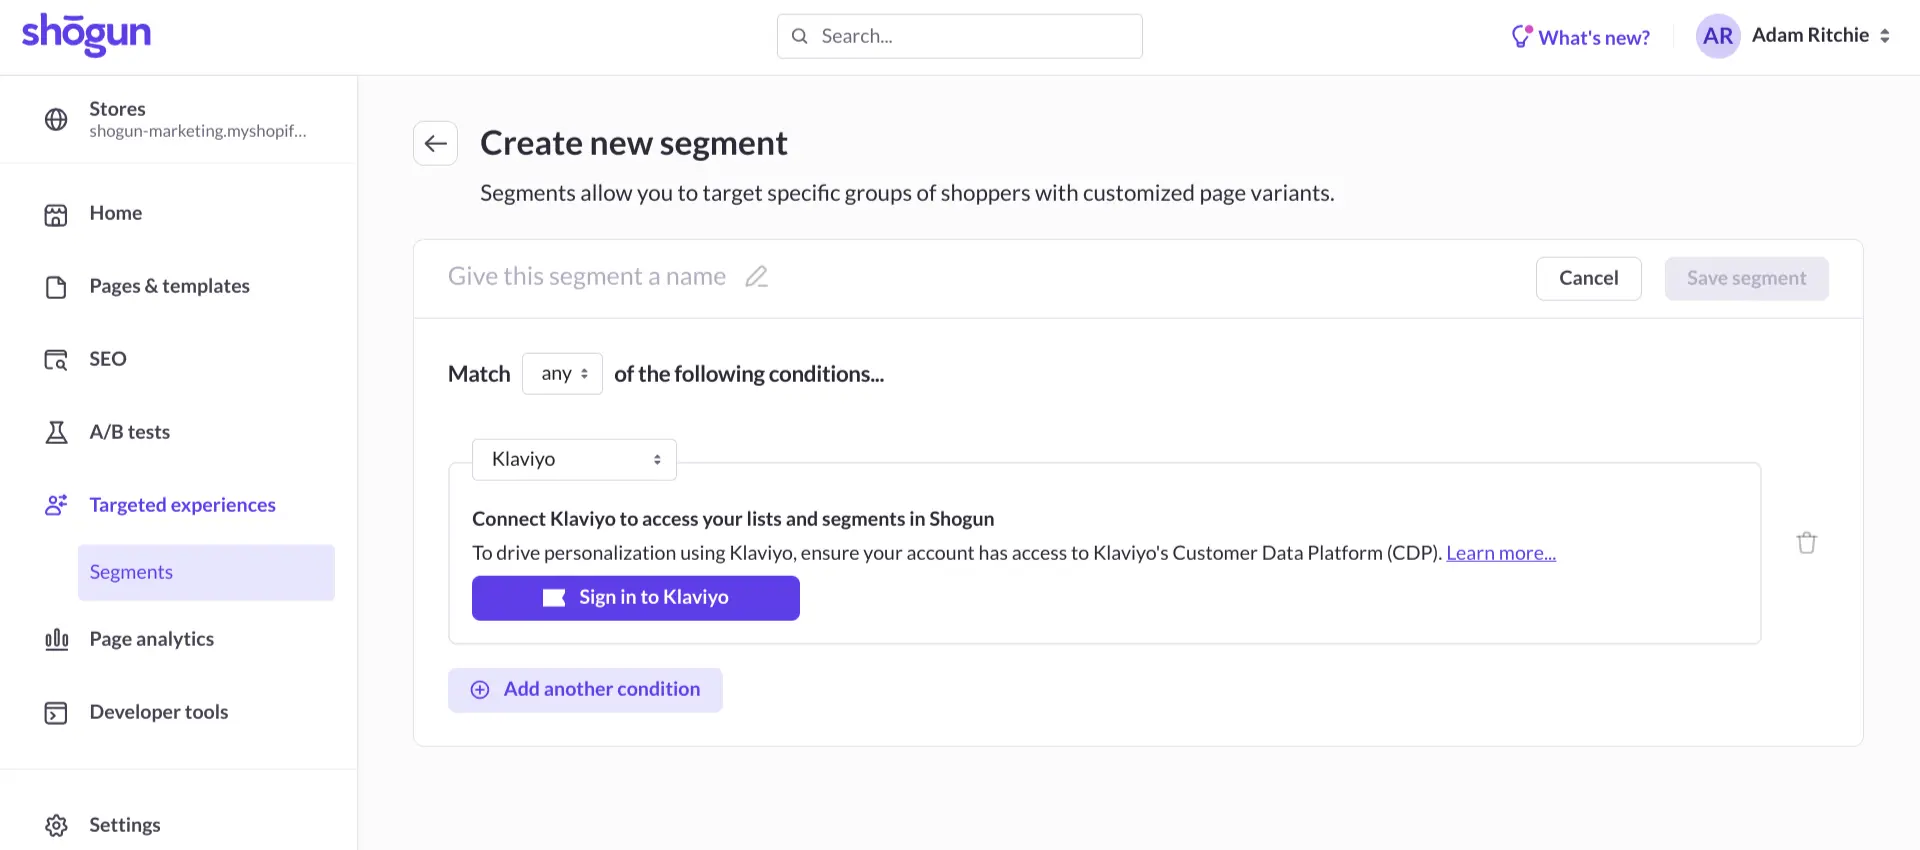 With Shogun, you can deliver customized content based on the visitor’s purchase history.